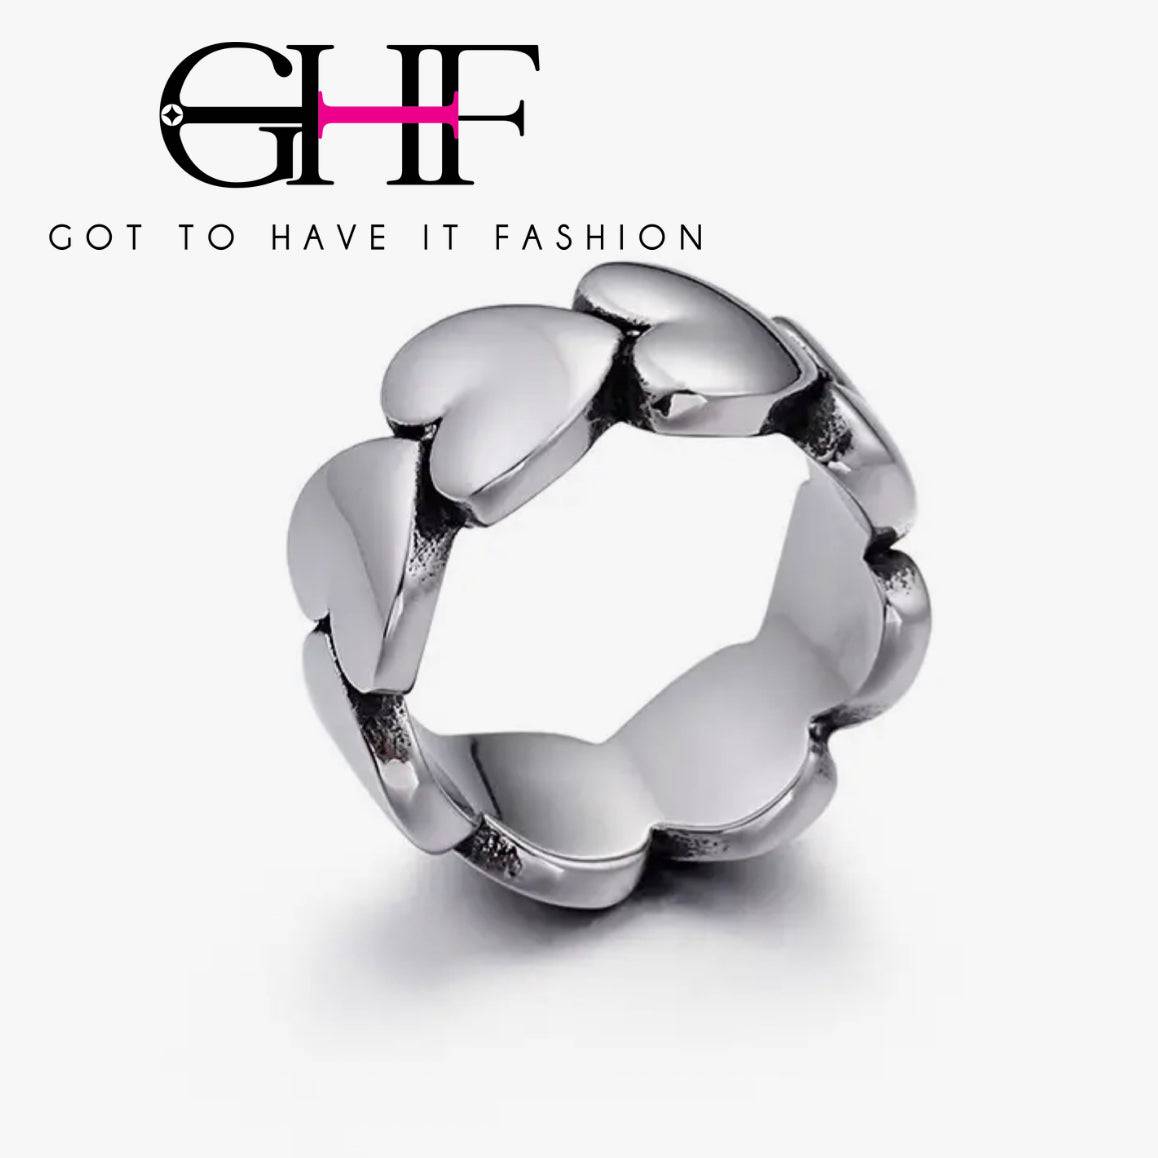 I Can't Live Without You Heart Ring - Gottohaveitfashion